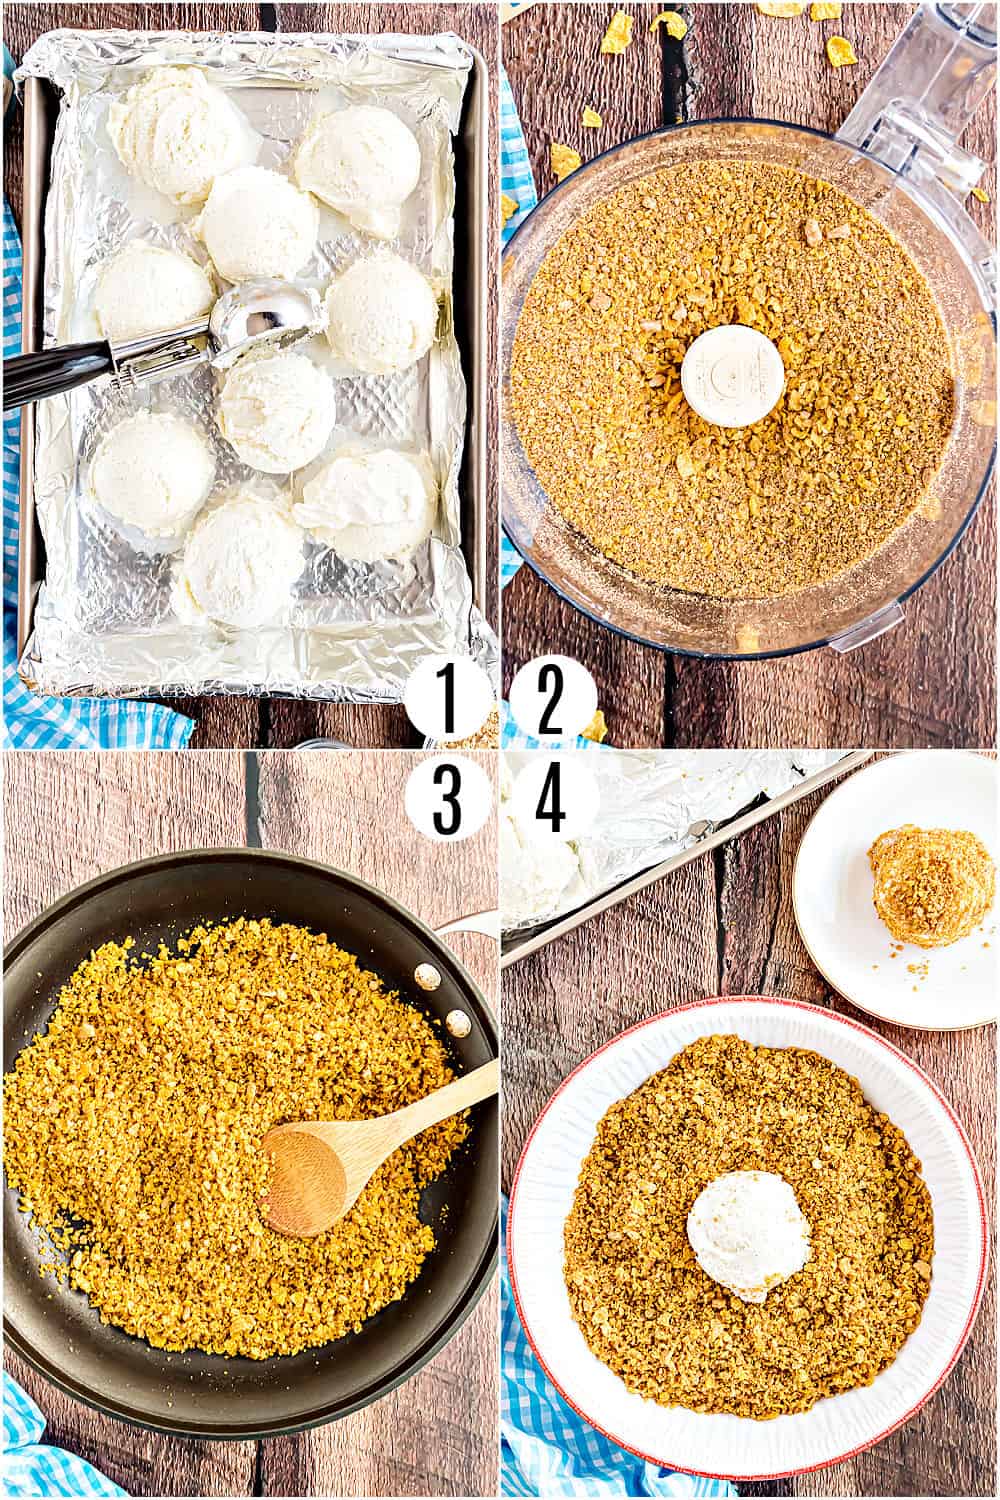 Step by step photos showing how to make fried ice cream.